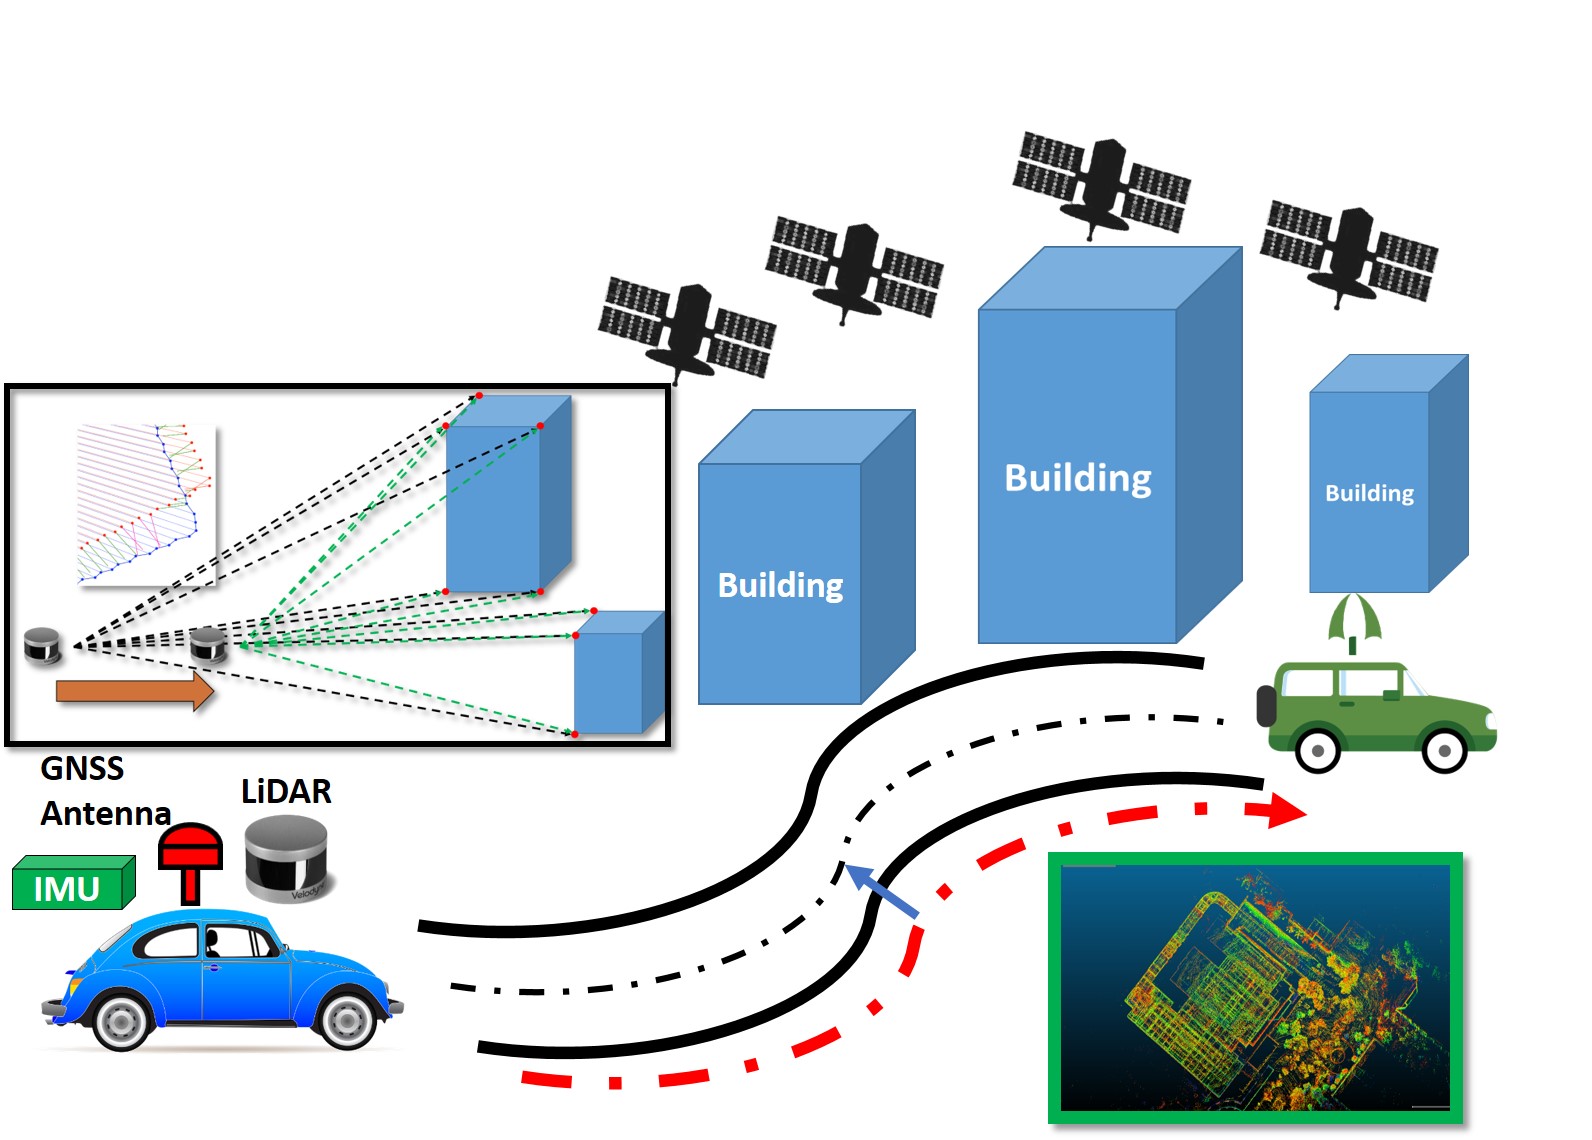 Navigation Engine Design for Automated Driving Using INS/GNSS/3D LiDAR-SLAM and Integrity Assessment